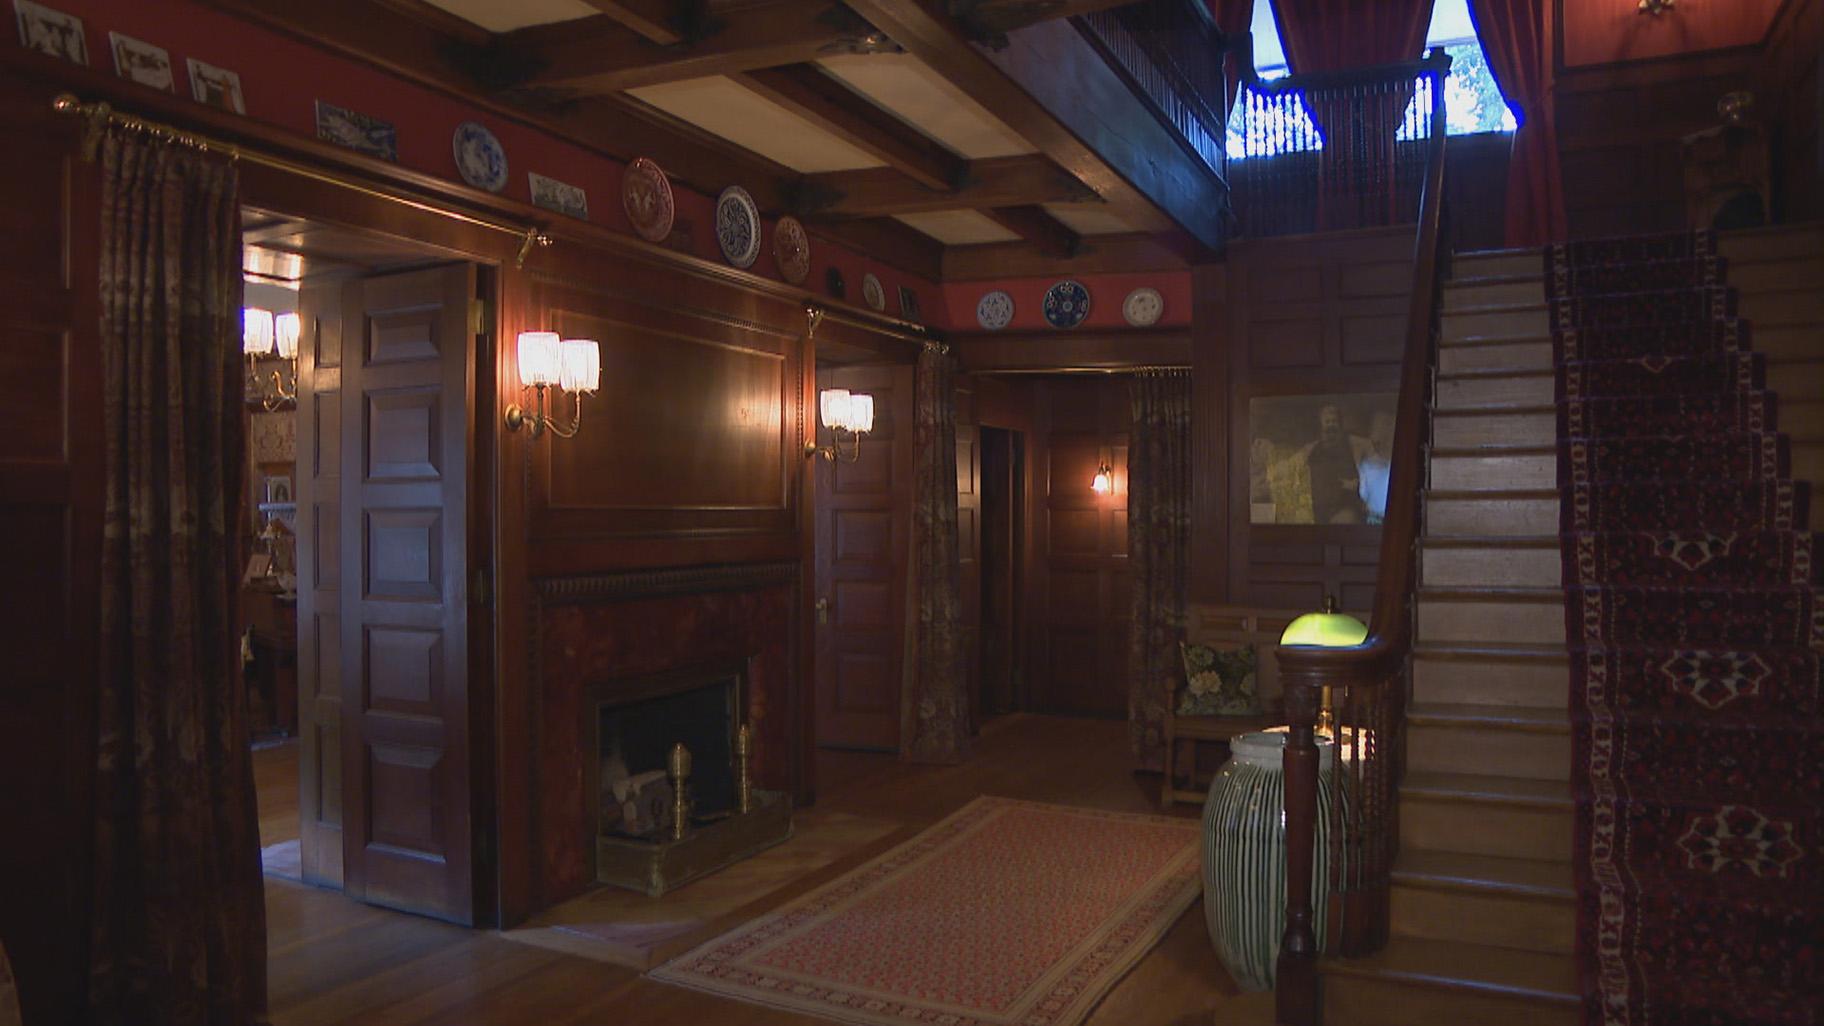 Glessner House is one of the original Prairie Avenue homes of the late 19th century. (WTTW News)